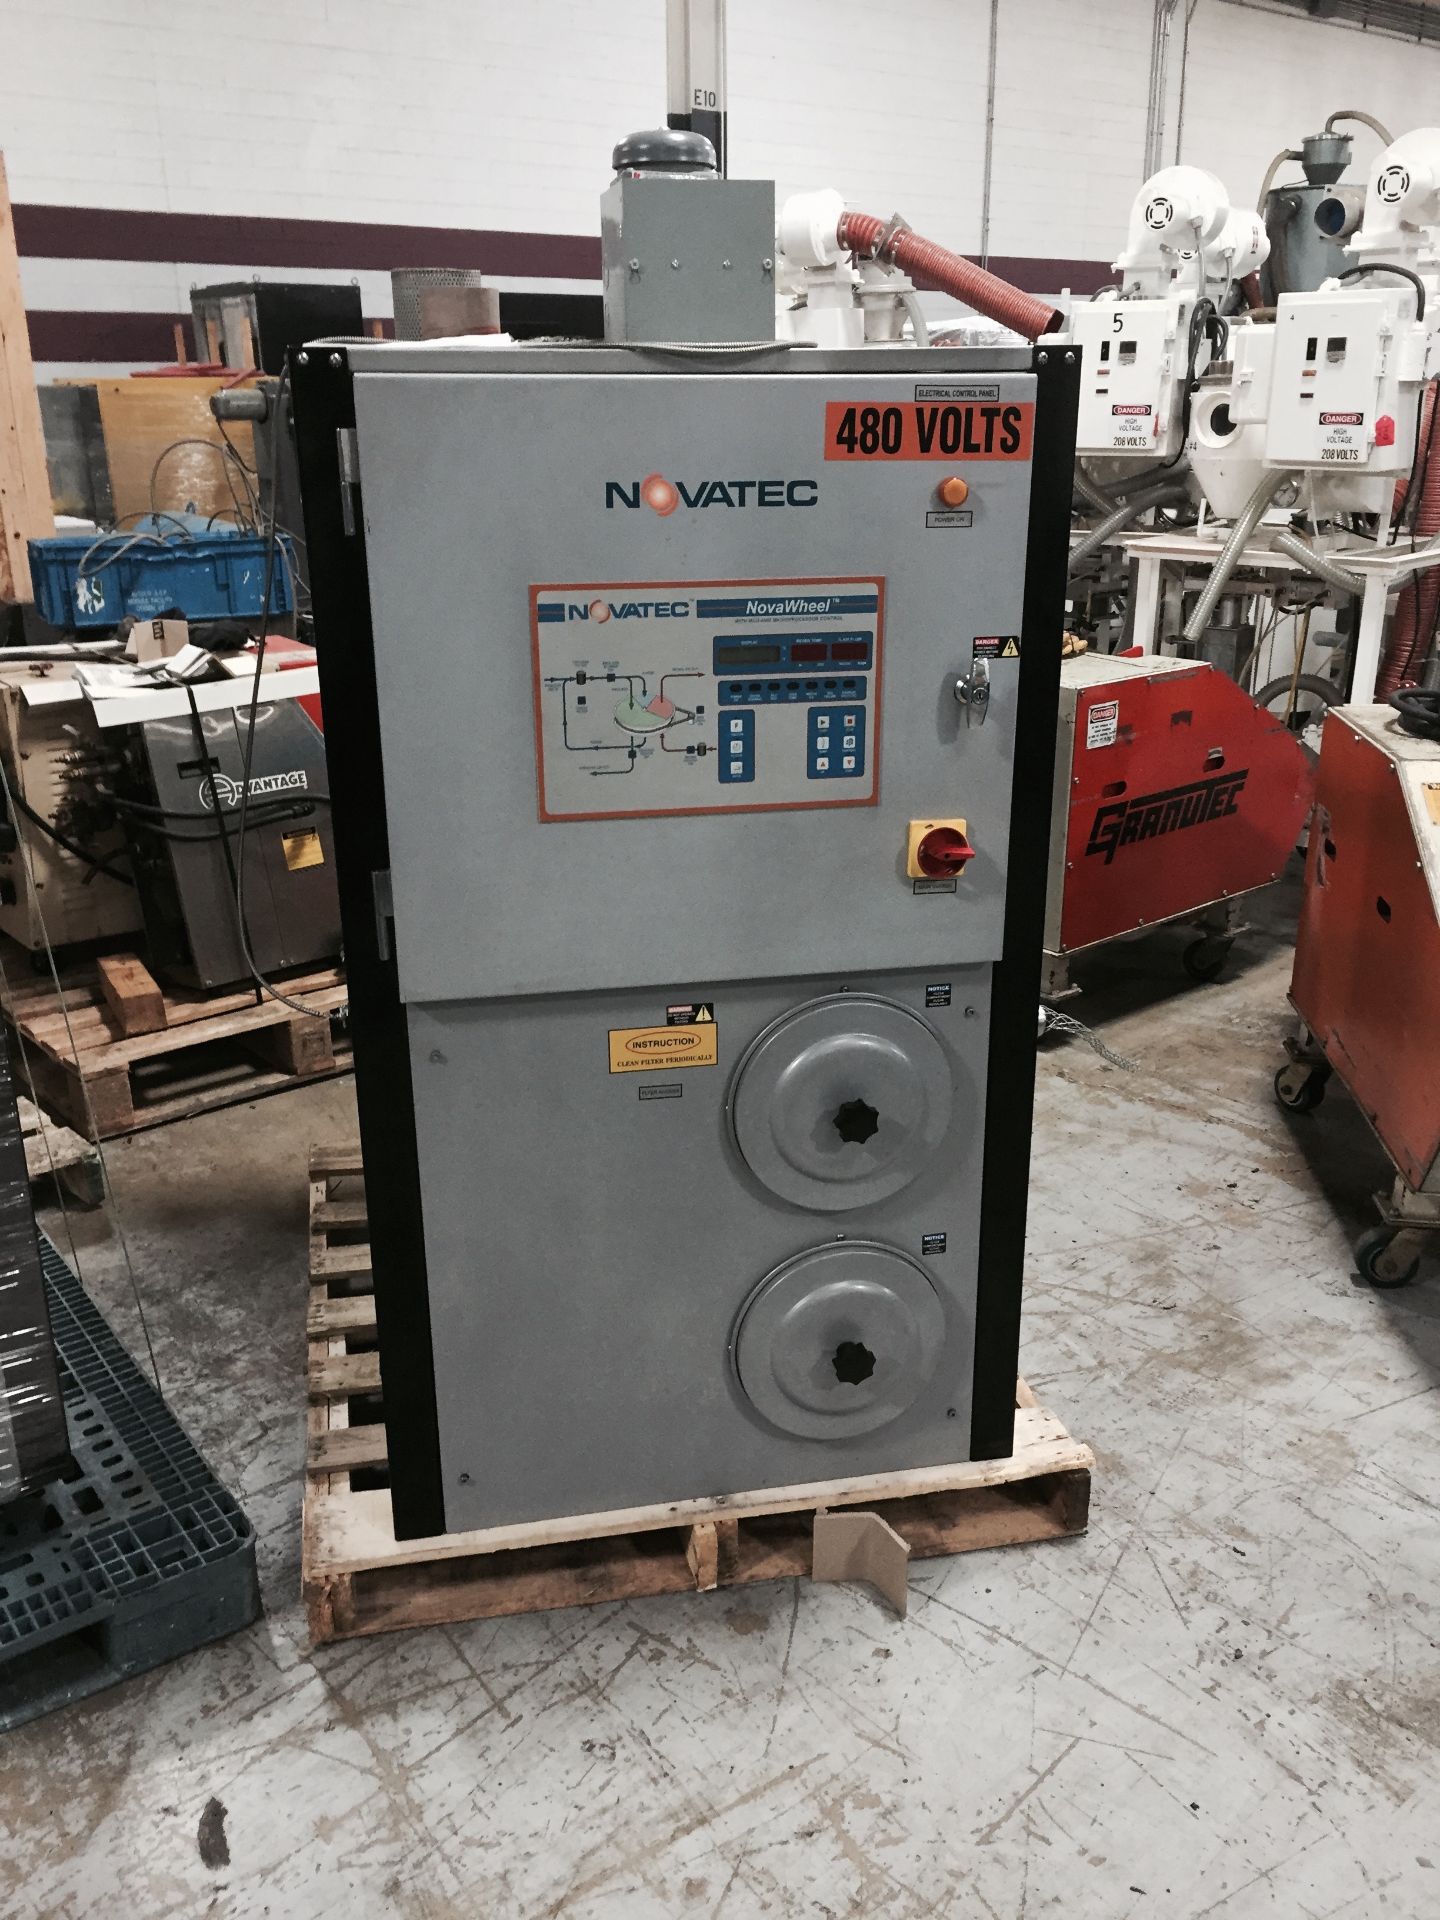 Novatec NW-300 Dryer: Manufactured 12/2007, 460v, Serial # NW-300-46-004 *LOCATED IN ITASCA, IL